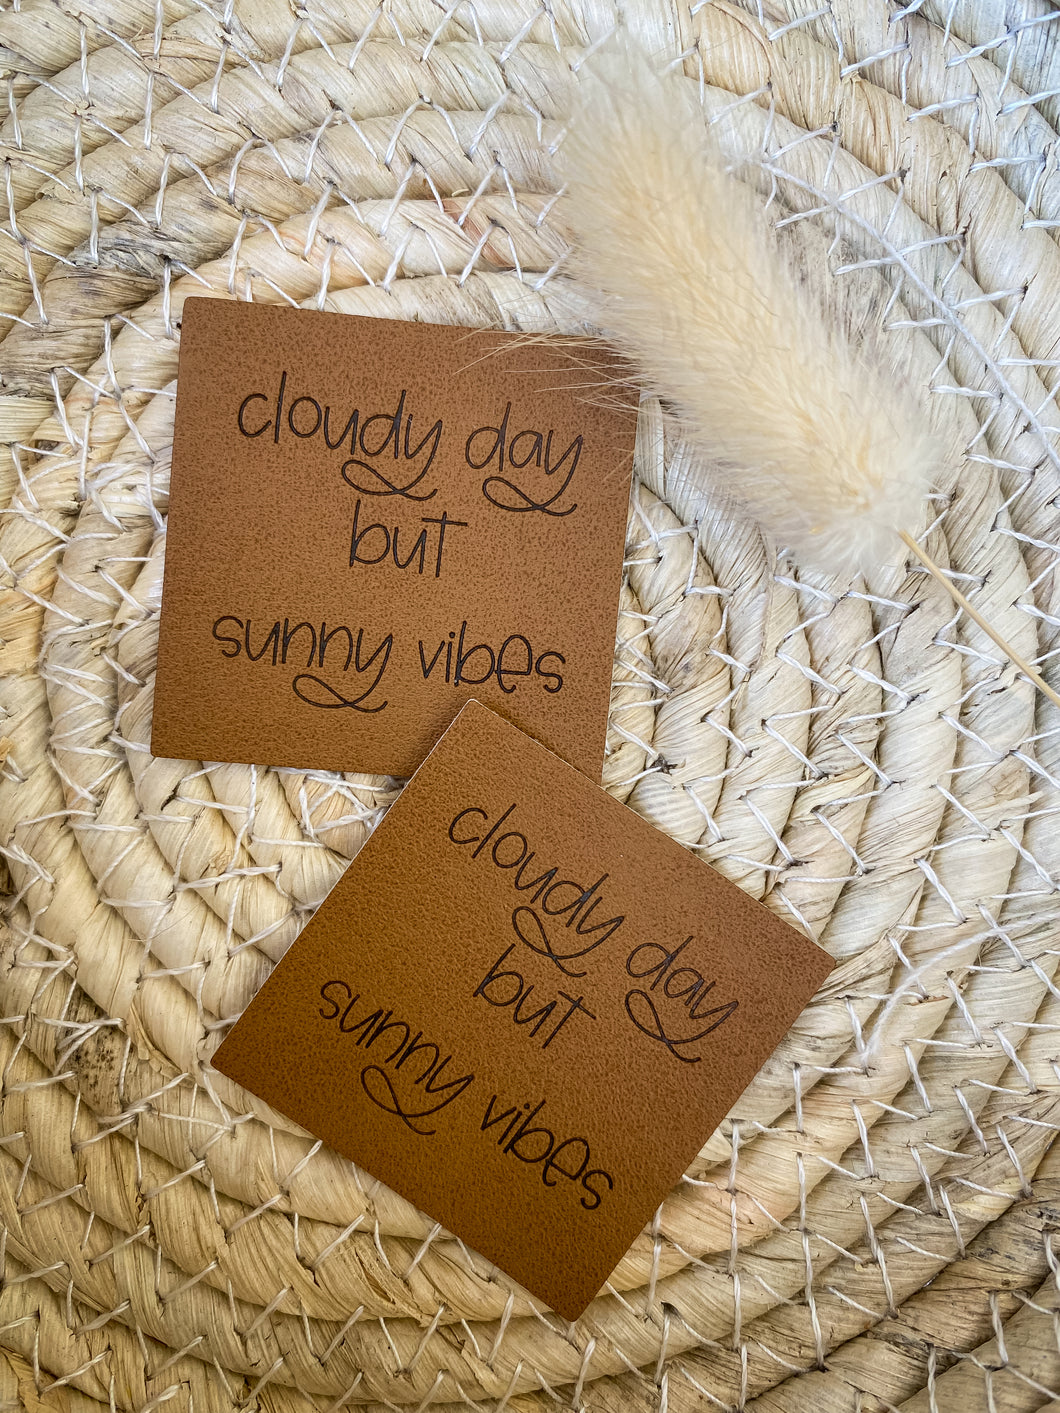 cloudy days but sunny vibes Label